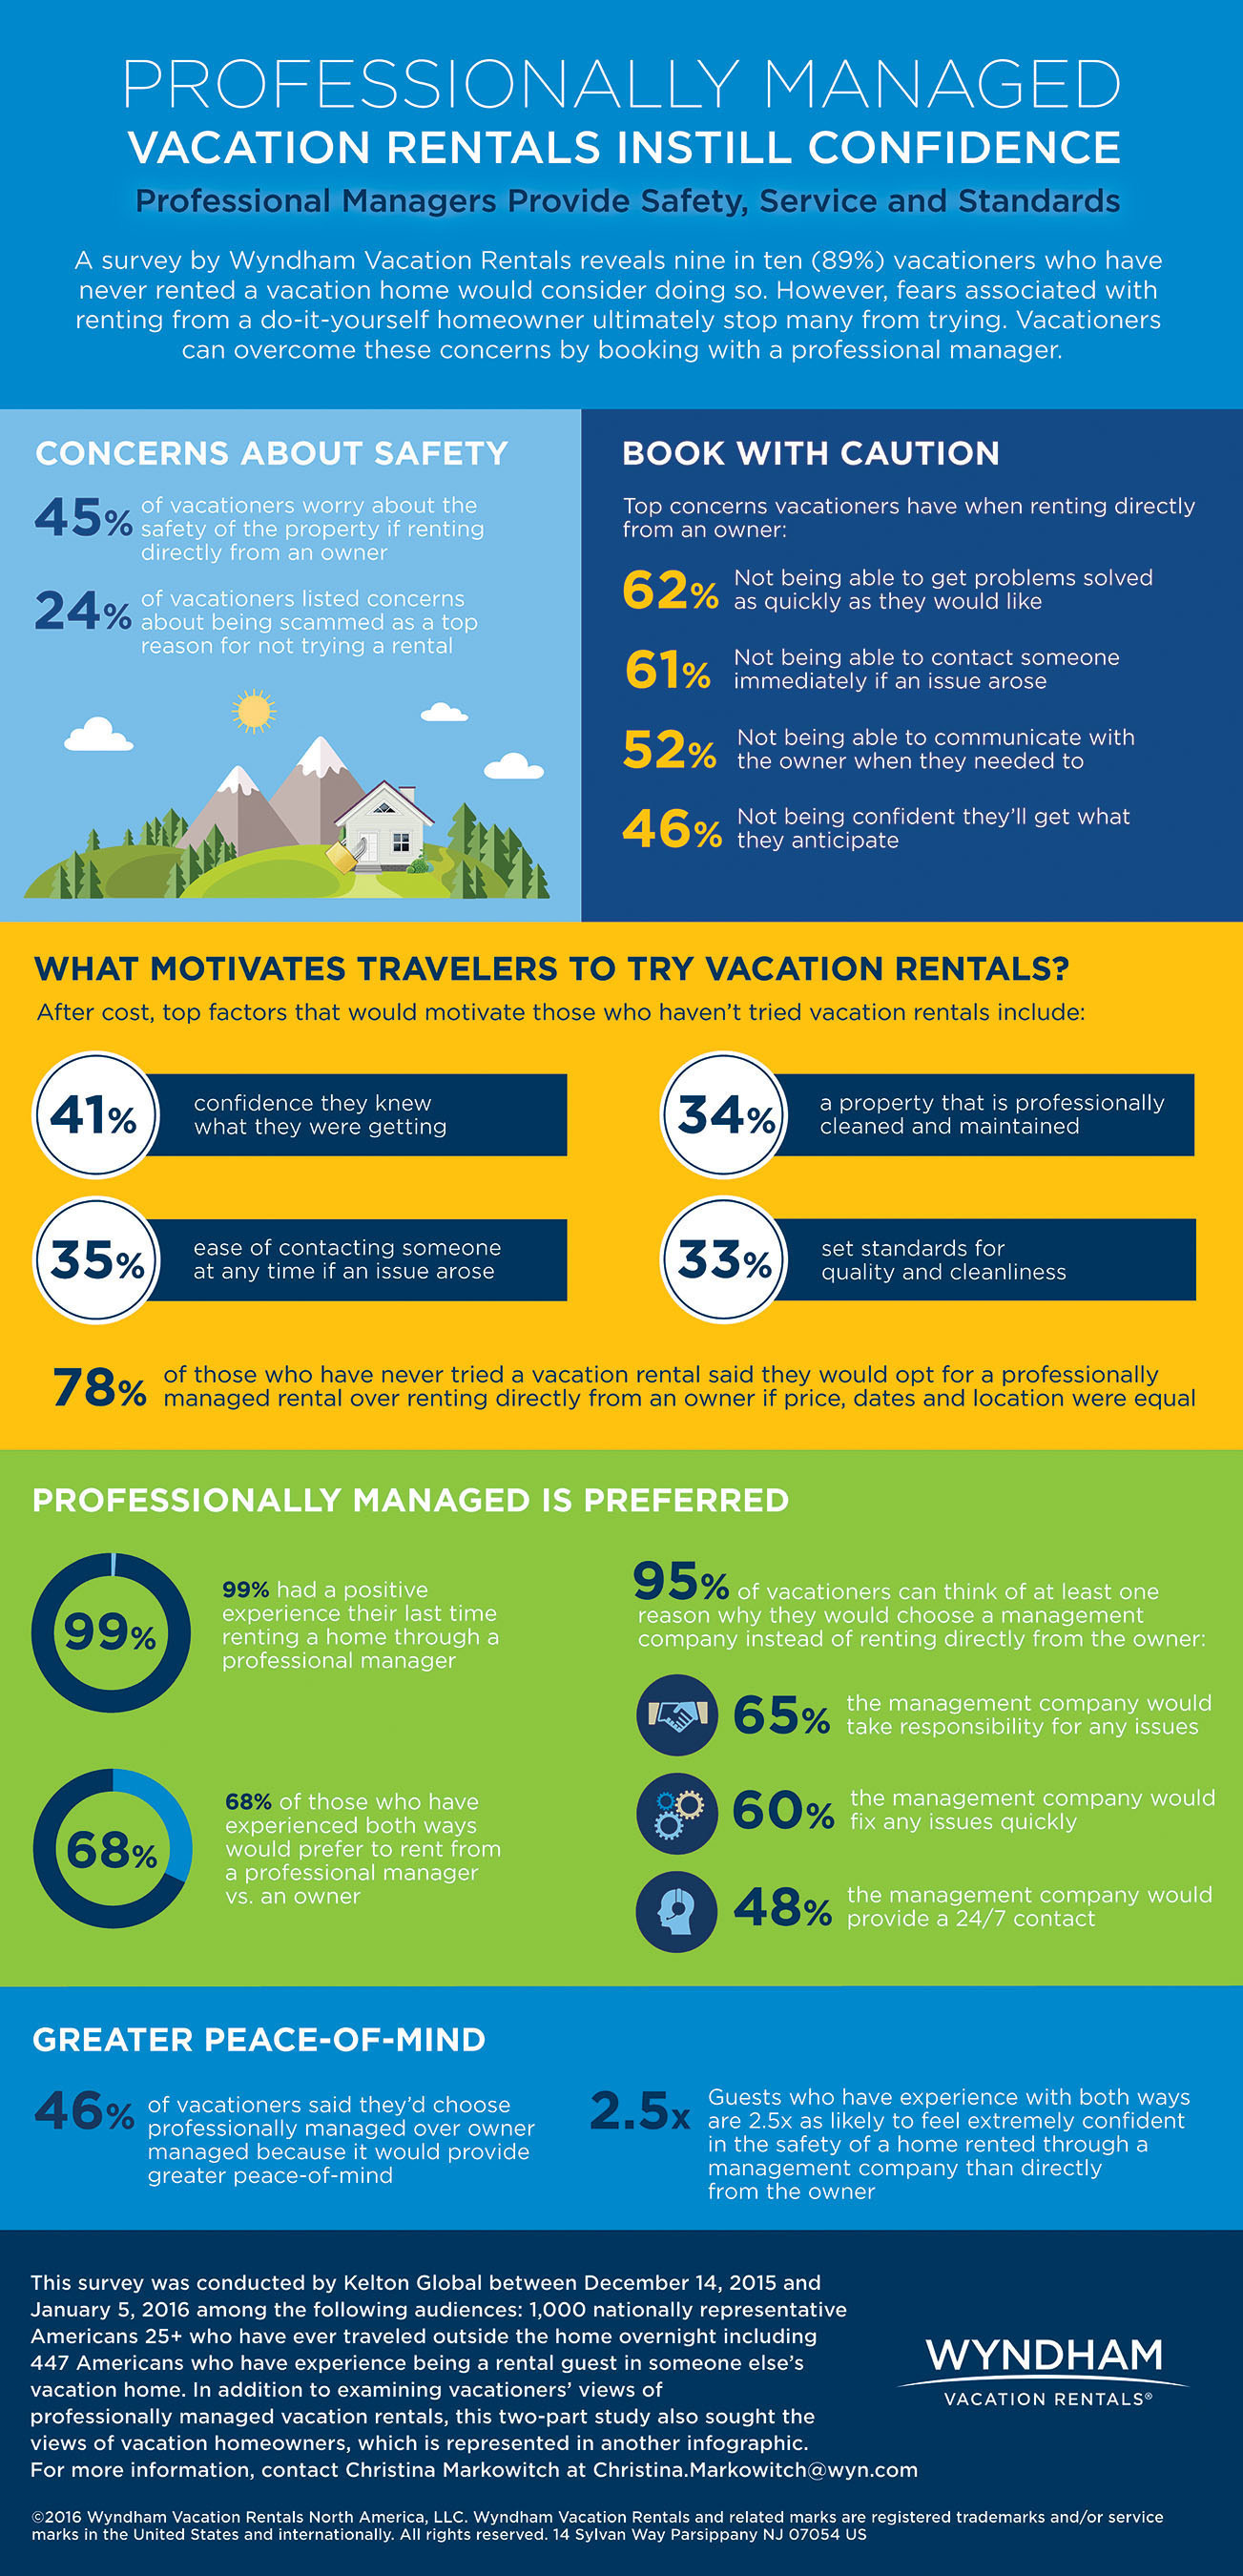 A survey by Wyndham Vacation Rentals reveals nine in ten (89%) vacationers who have never rented a vacation home would consider doing so. But fears associated with renting from a do-it-yourself homeowner stop many from trying. (PRNewsFoto/Wyndham Vacation Rentals)